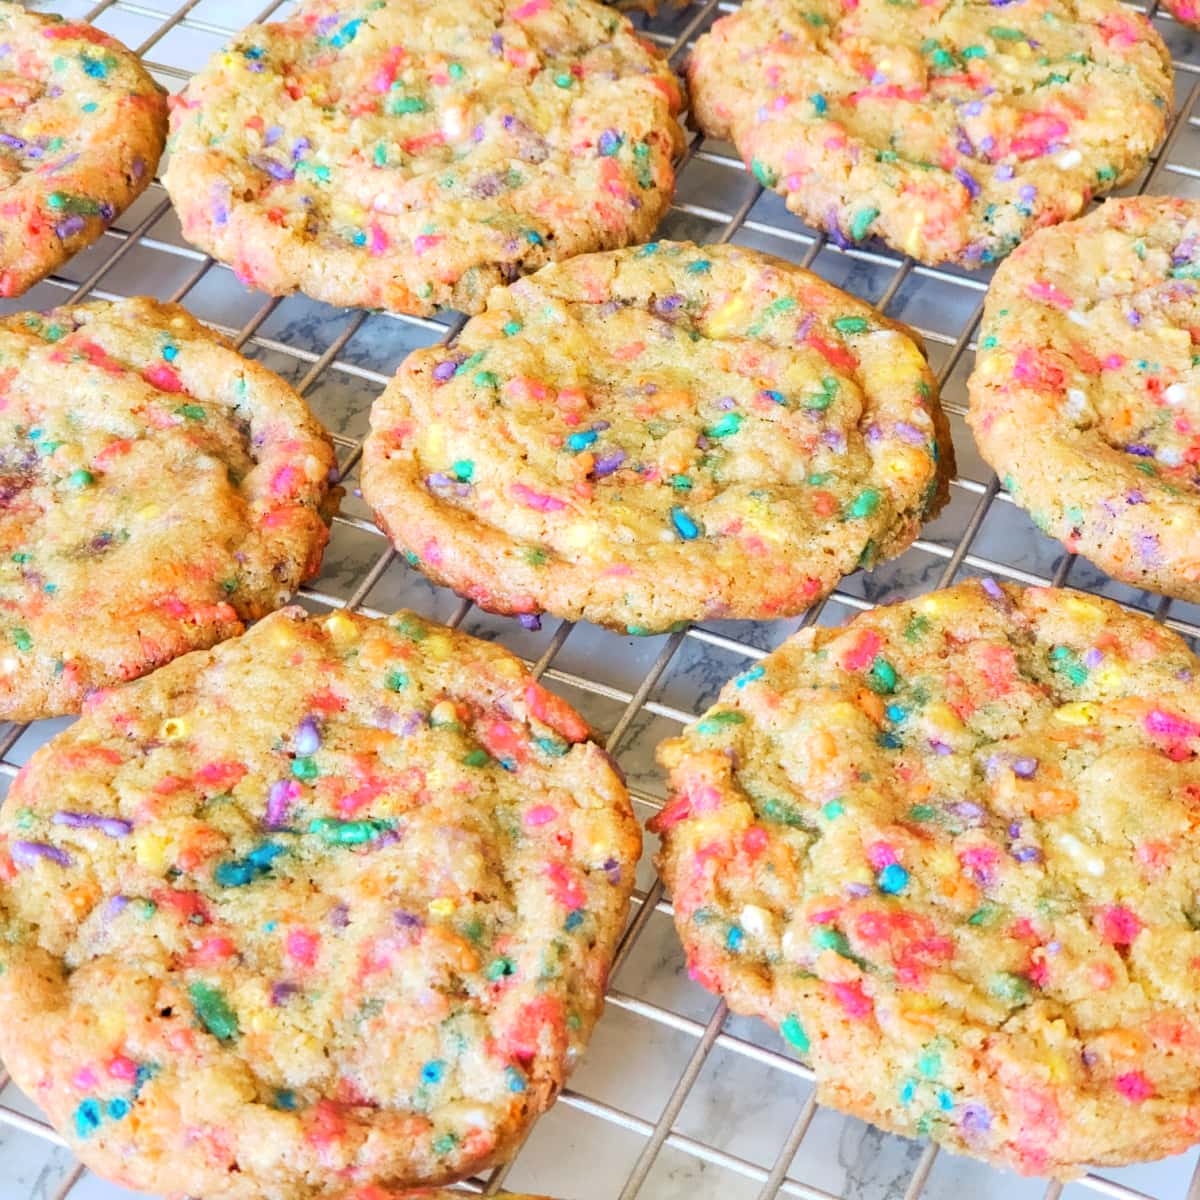 8 Confetti Sprinkle Cookies cooling on a baking rack